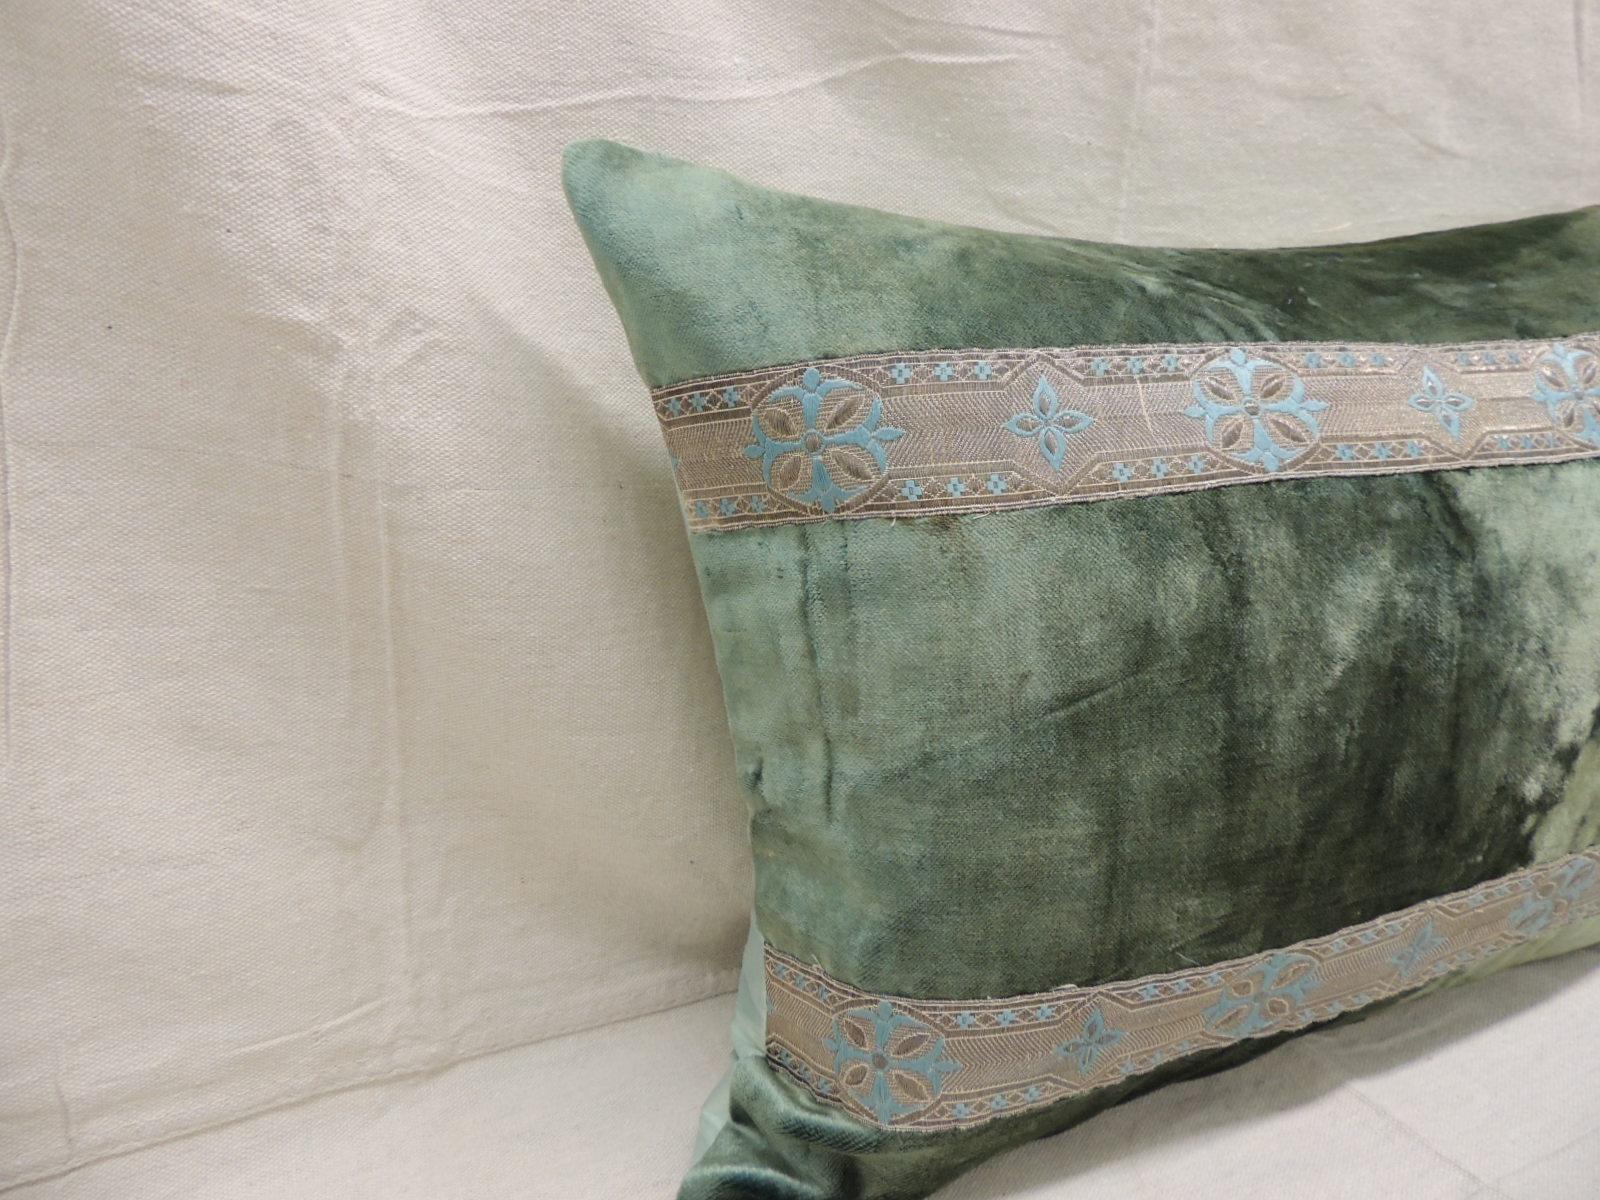 Regency Pair of Antique Crushed Velvet Green and Silver Bolsters Decorative Pillows